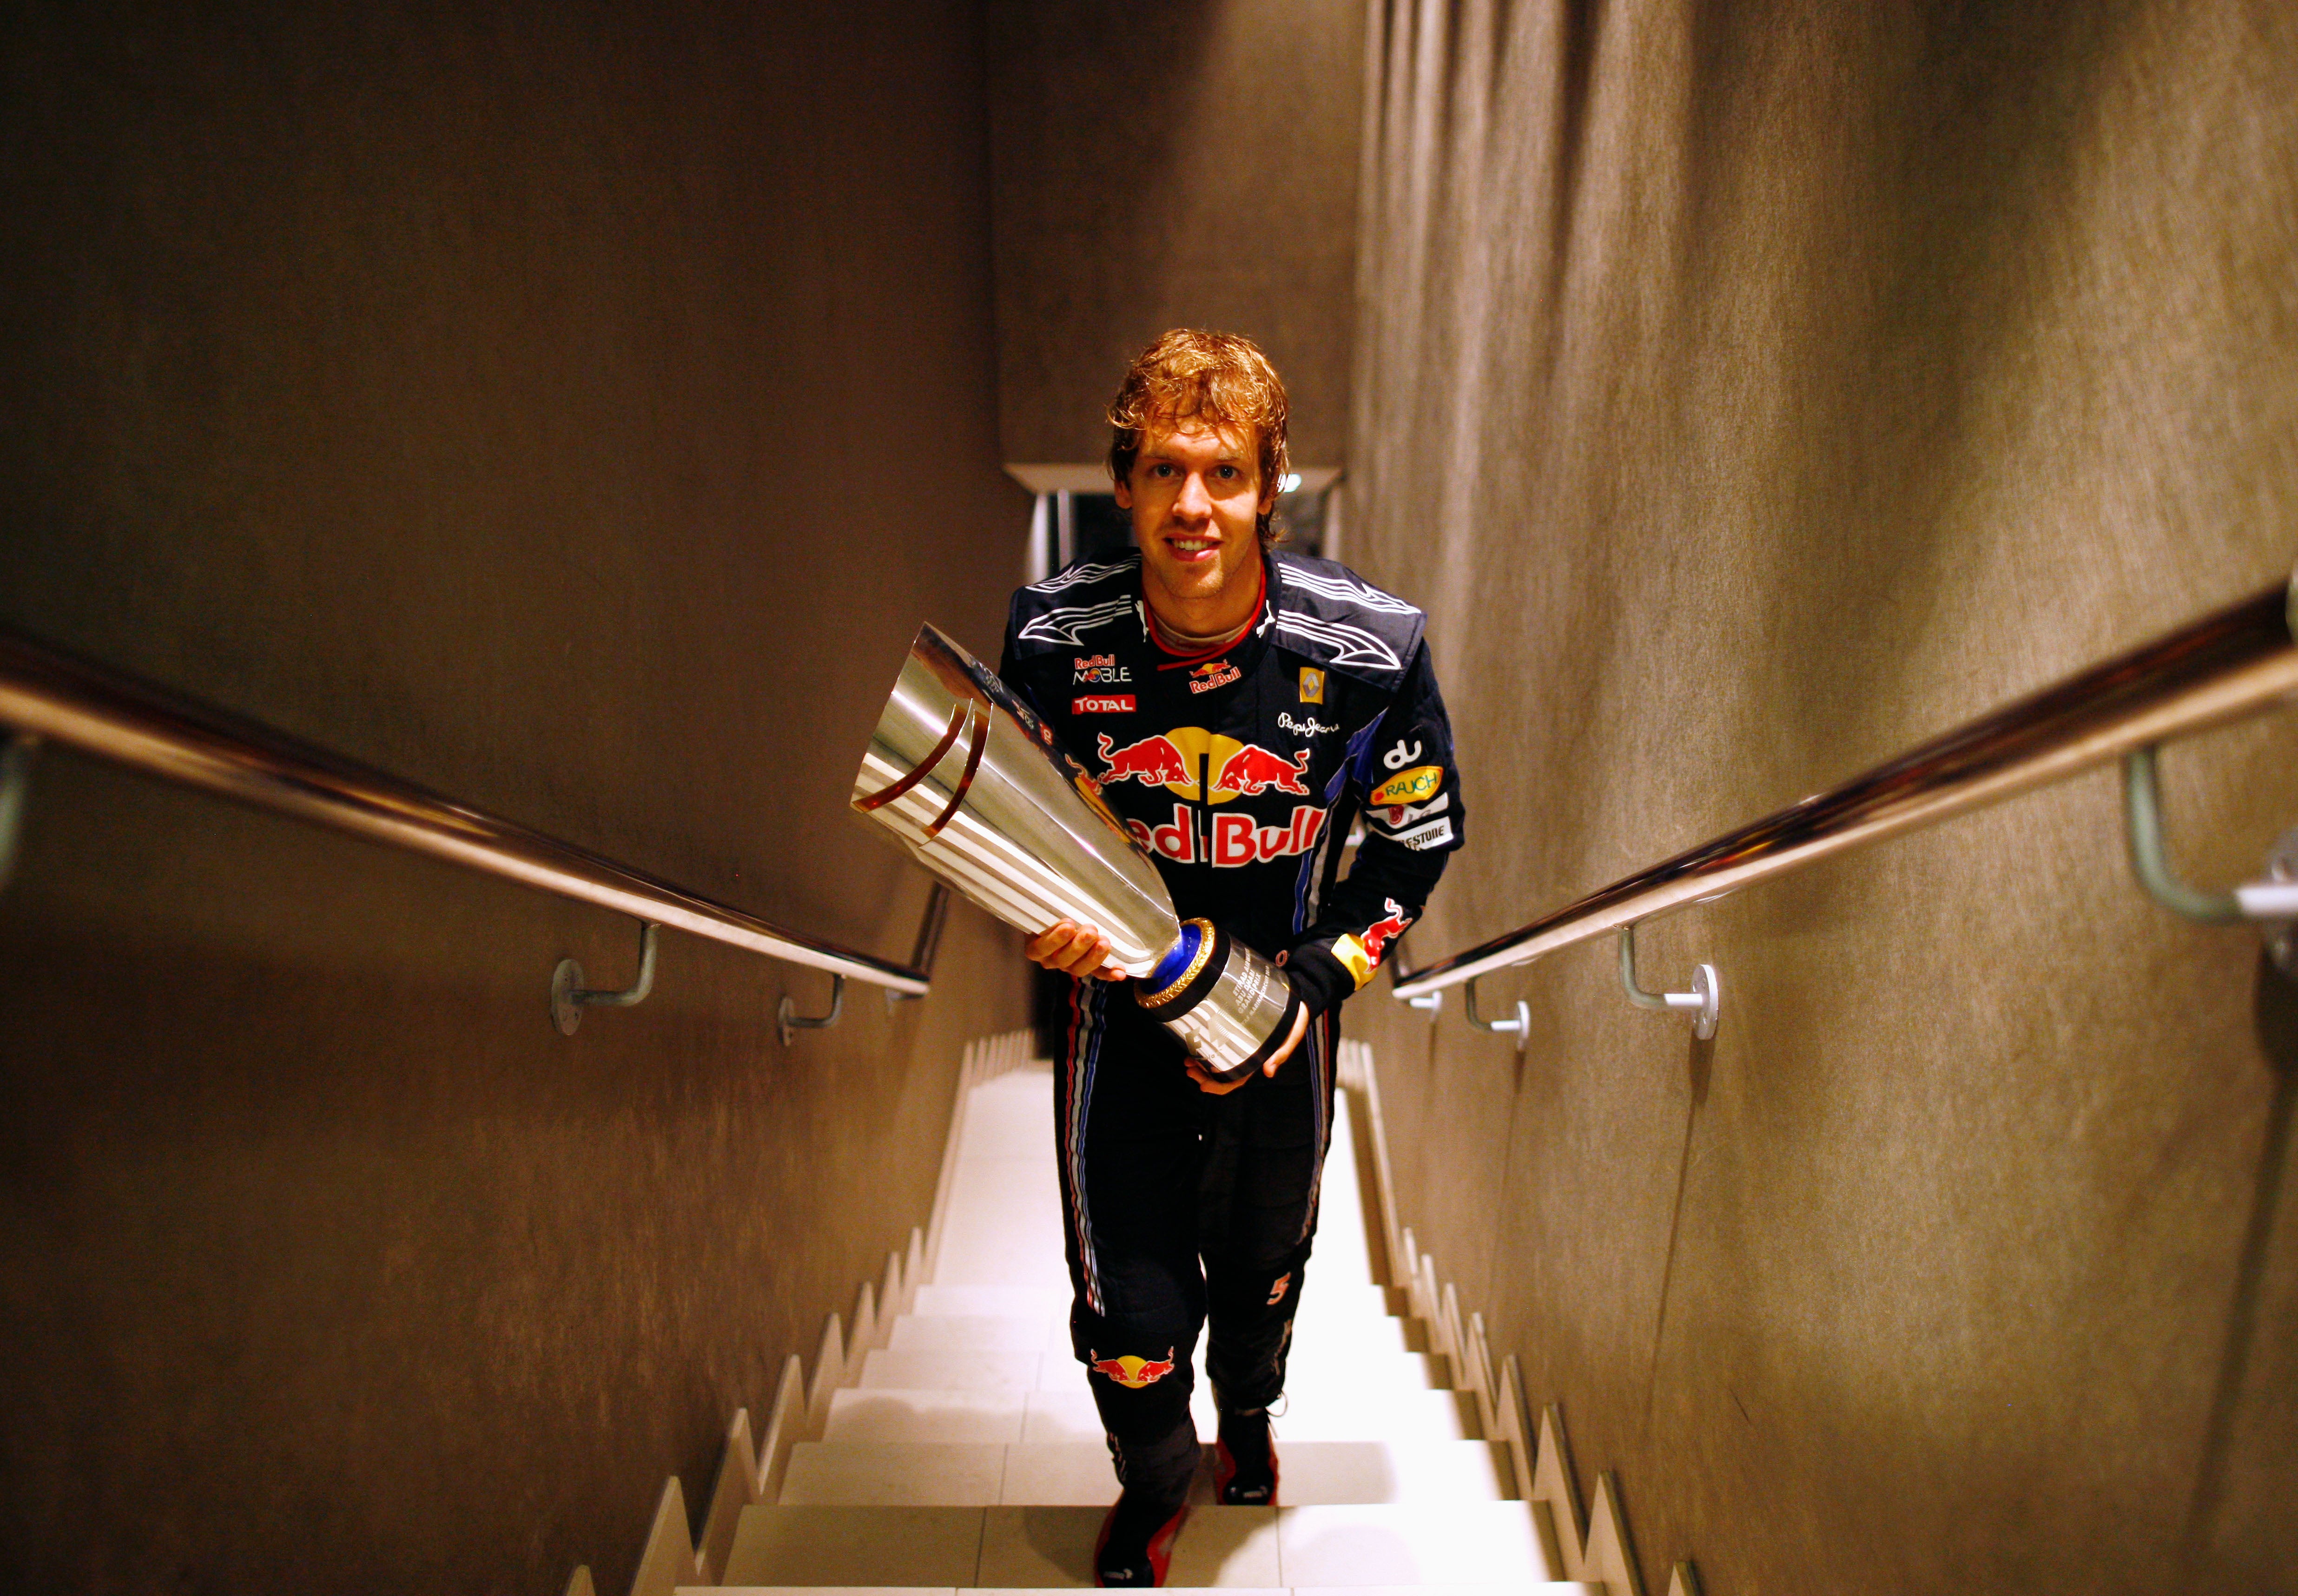 Vettel carries his trophy after winning the 2010 world title in Abu Dhabi – his first of four